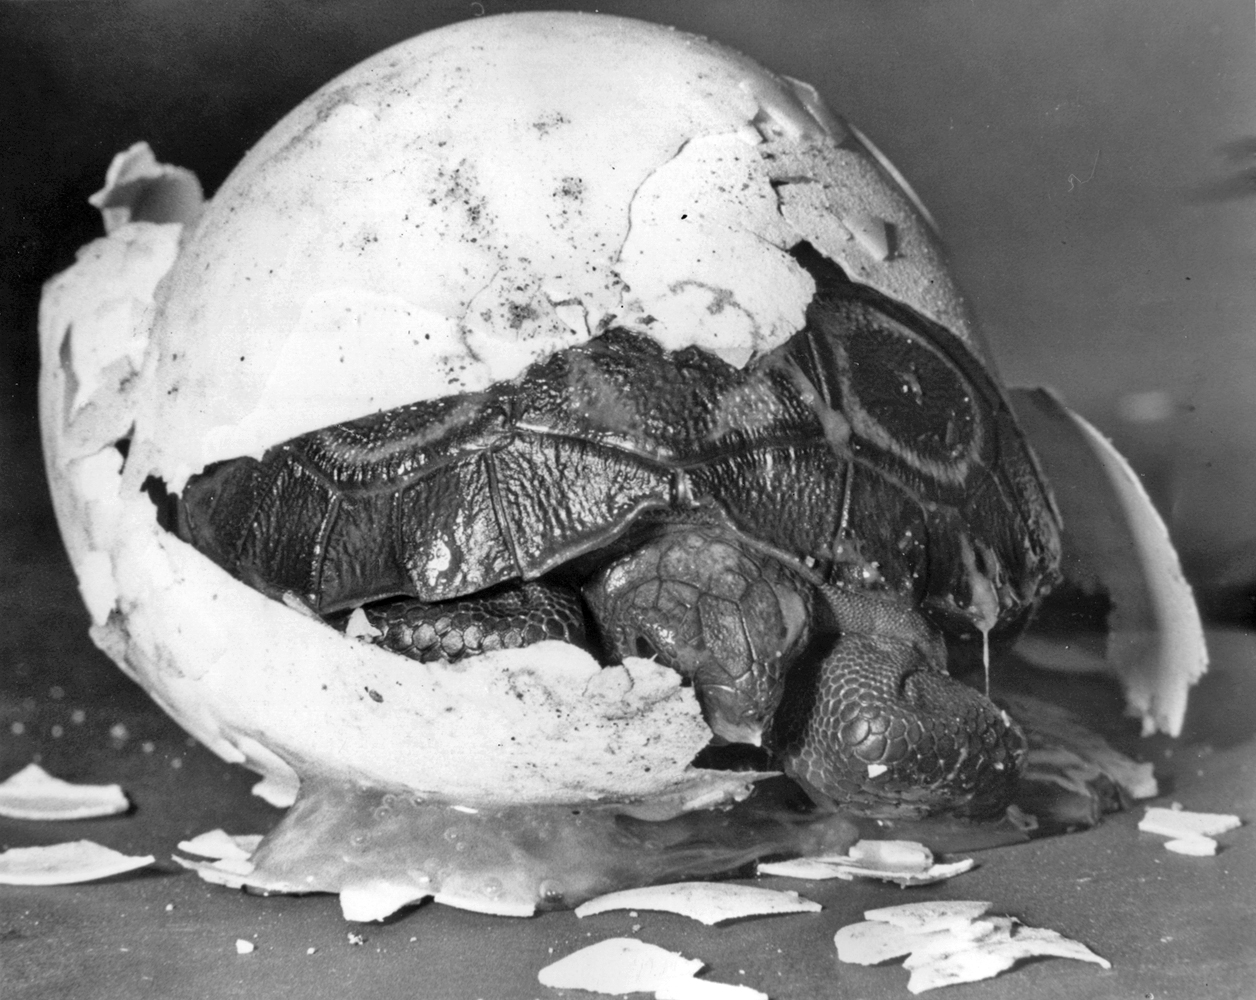 The Zoo's first Galápagos tortoise hatchings took place in October 1958, cause for tremendous celebration. At hatching, they measured about 2 1/2 inches and weighed a little over 2 ounces—a bit of a surprise for a reptile destined to be a giant someday!